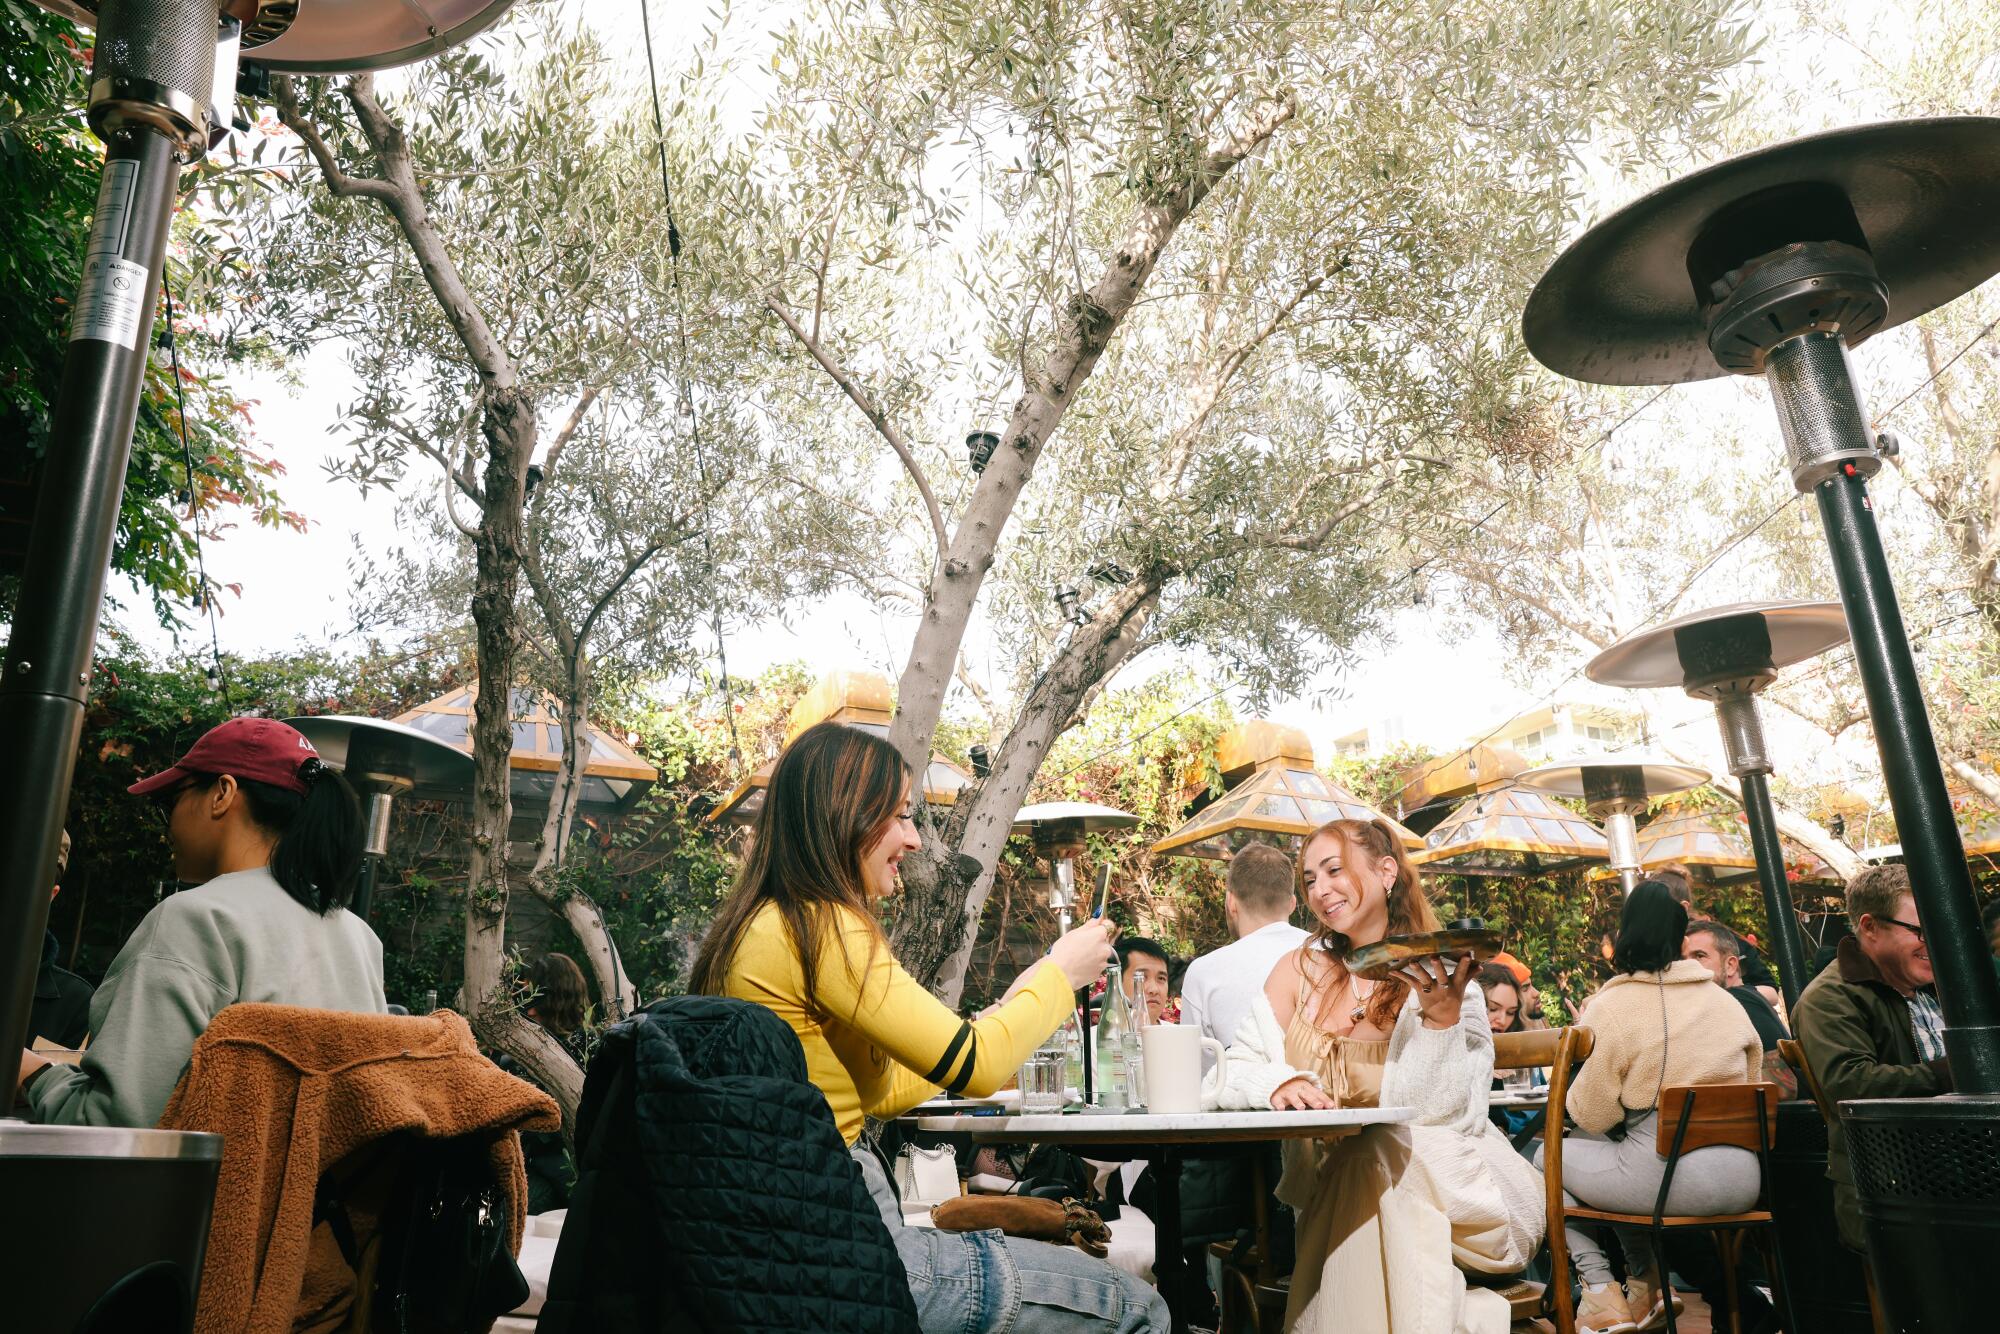 Two women sit at a table on a leafy outdoor patio, one holding up a tray and the other taking a photo with her phone.